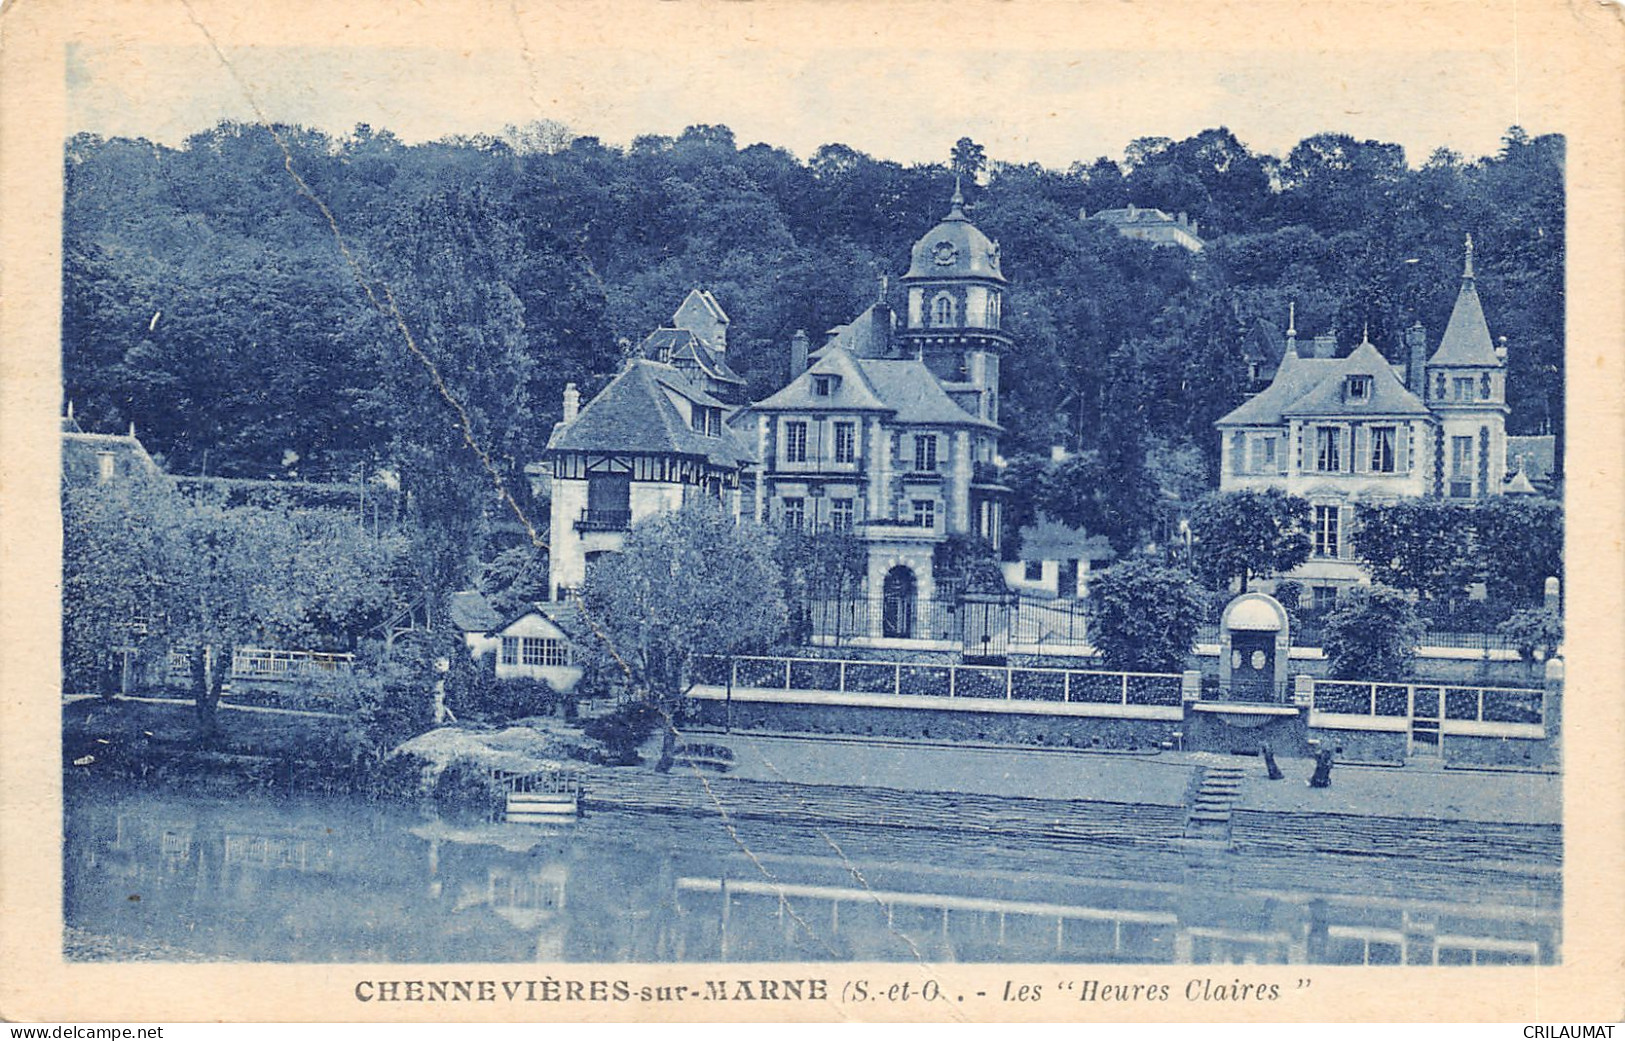 94-CHENNEVIERES SUR MARNE-LES HEURES CLAIRES-N°6026-C/0081 - Chennevieres Sur Marne